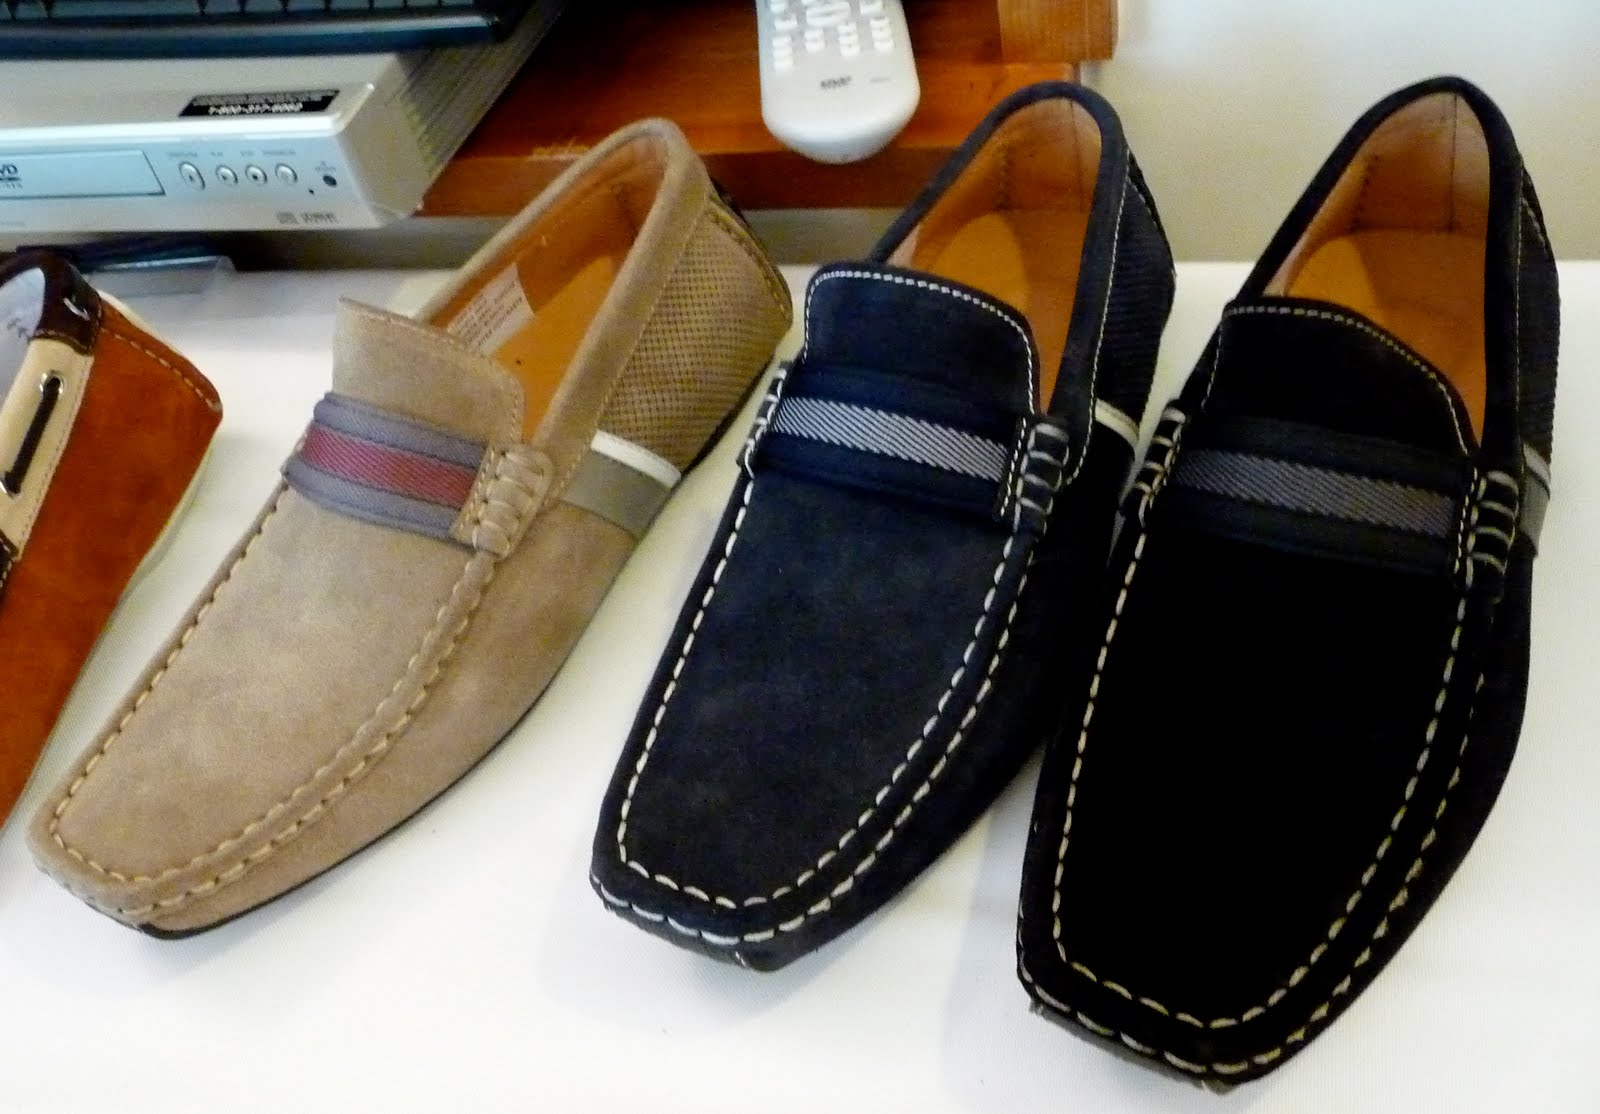 LYRA MAG.: MAGNANNI SHOES FOR MEN PRE-SPRING & SPRING 2011 COLLECTIONS